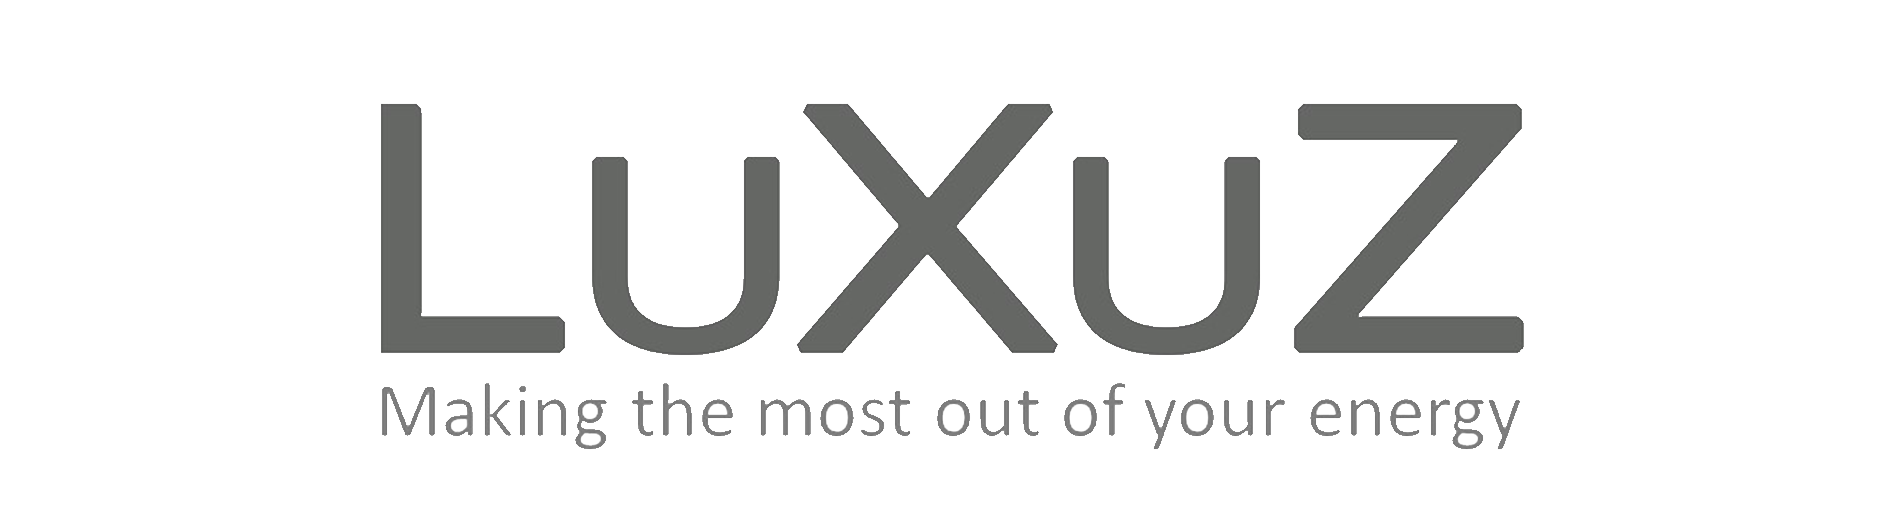 LuXuZ - Making the most out of your energy